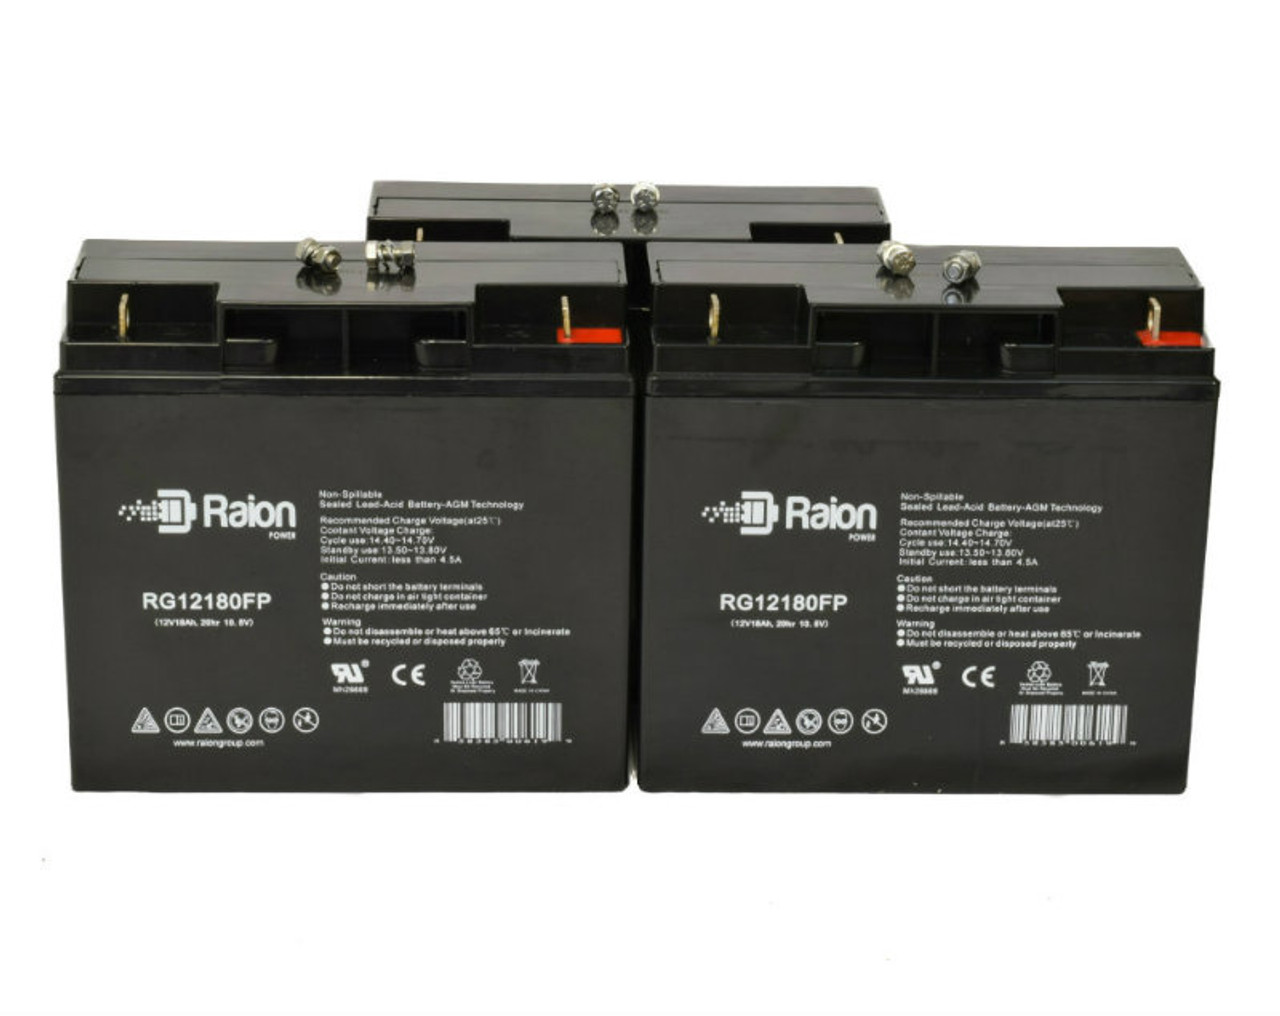 Raion Power Replacement 12V 18Ah Battery for Duracell Powerpack 450 - 3 Pack